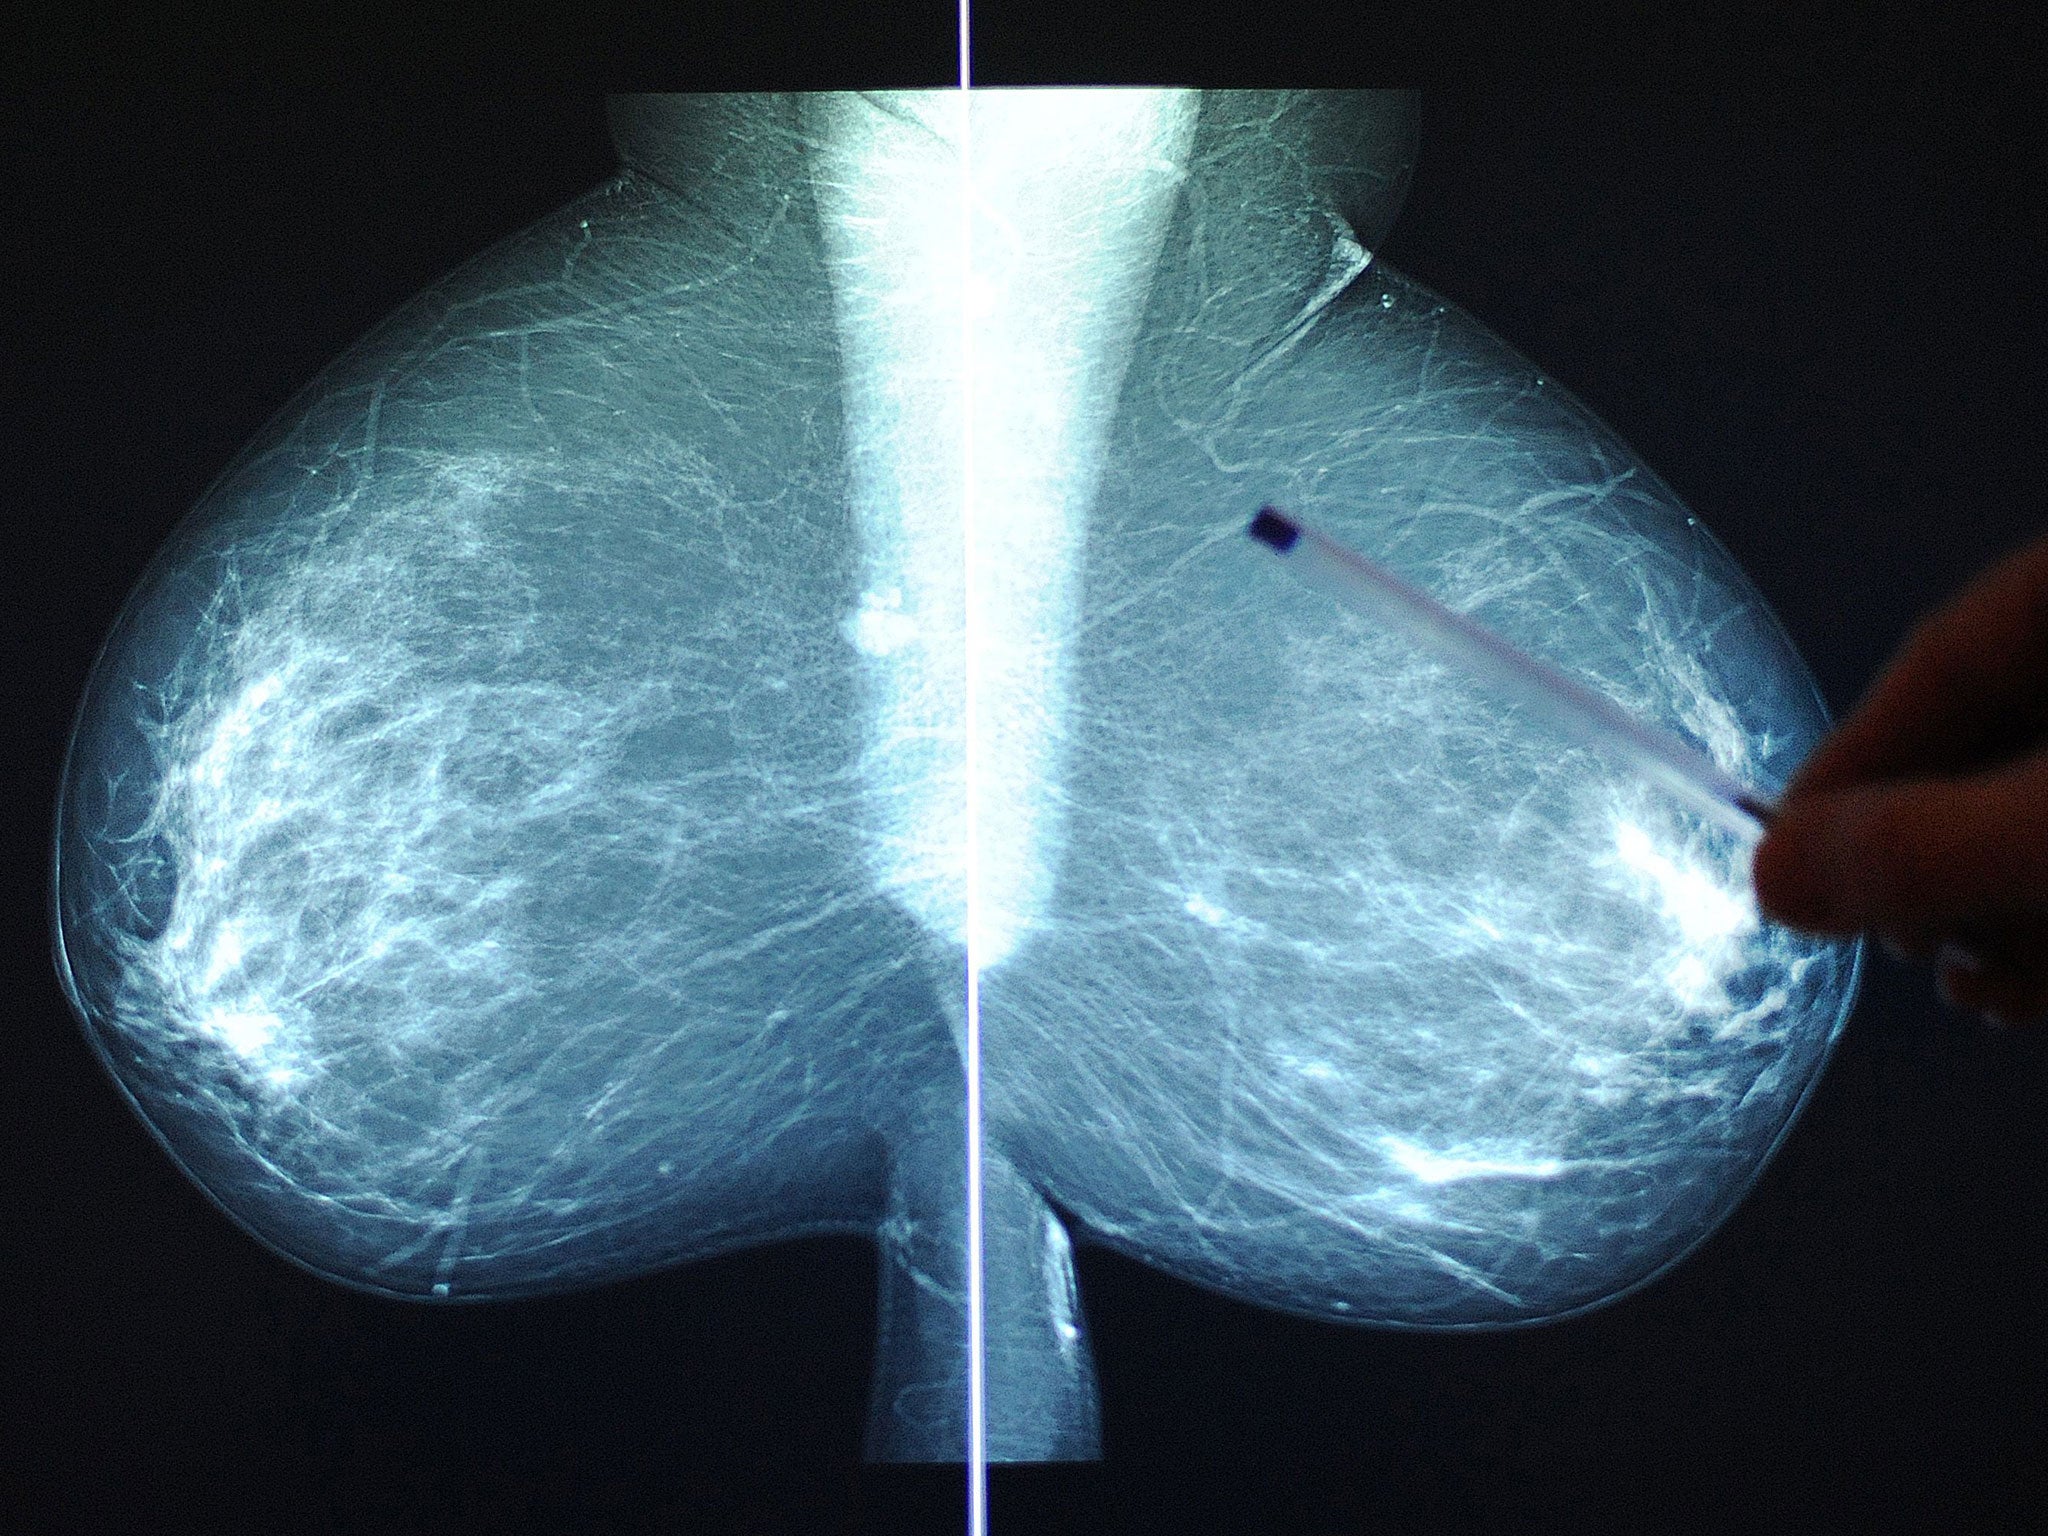 The risk of breast cancer in women increases by 20 per cent for every 10cm increase in height